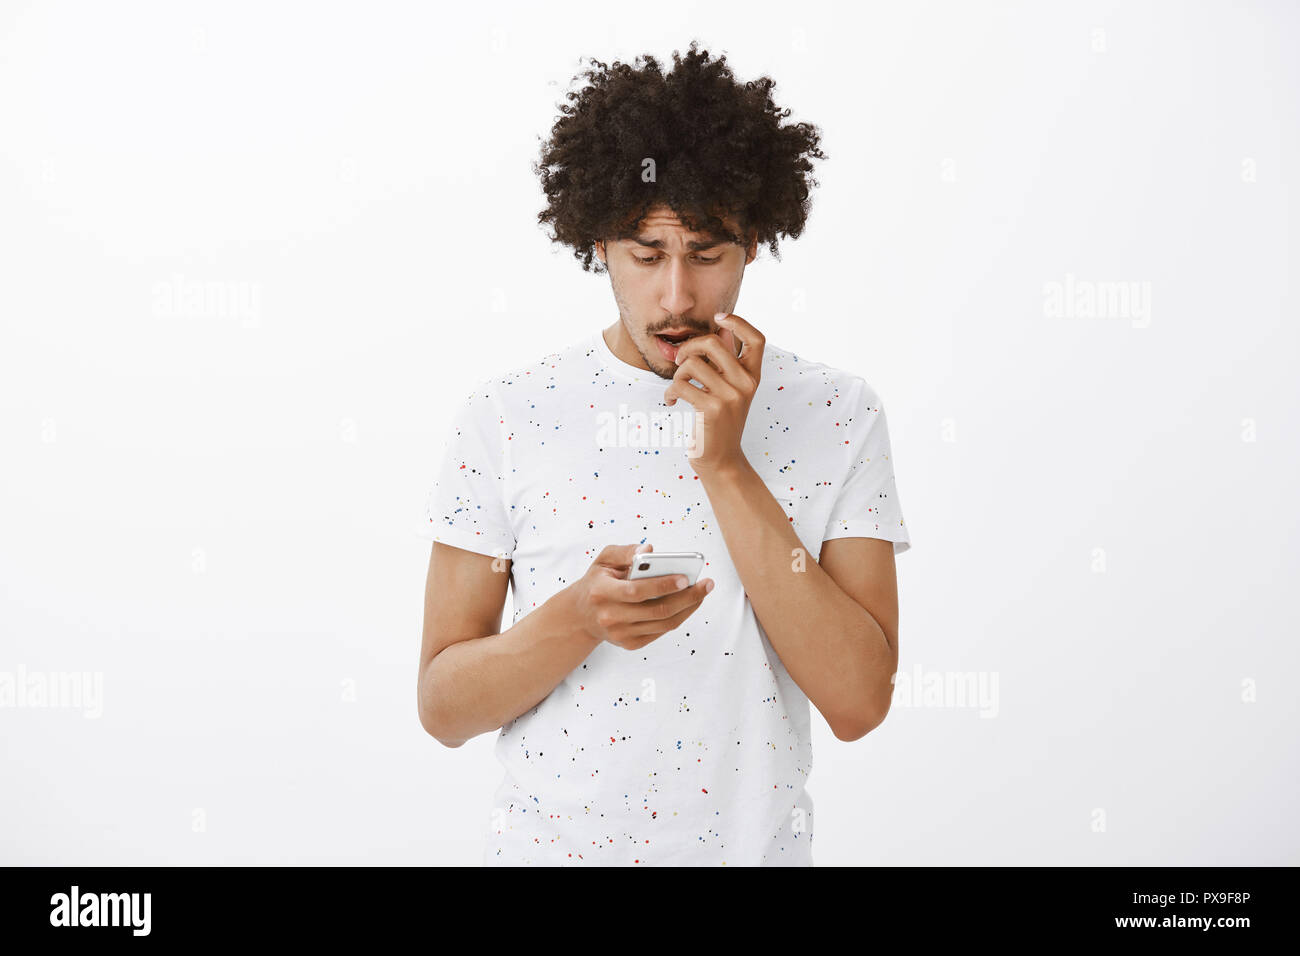 Cute hispanic football fan checking results of match via smarpthone, frowning and biting fingernail while looking worried at phone screen, losing bet, standing nervous over gray background Stock Photo